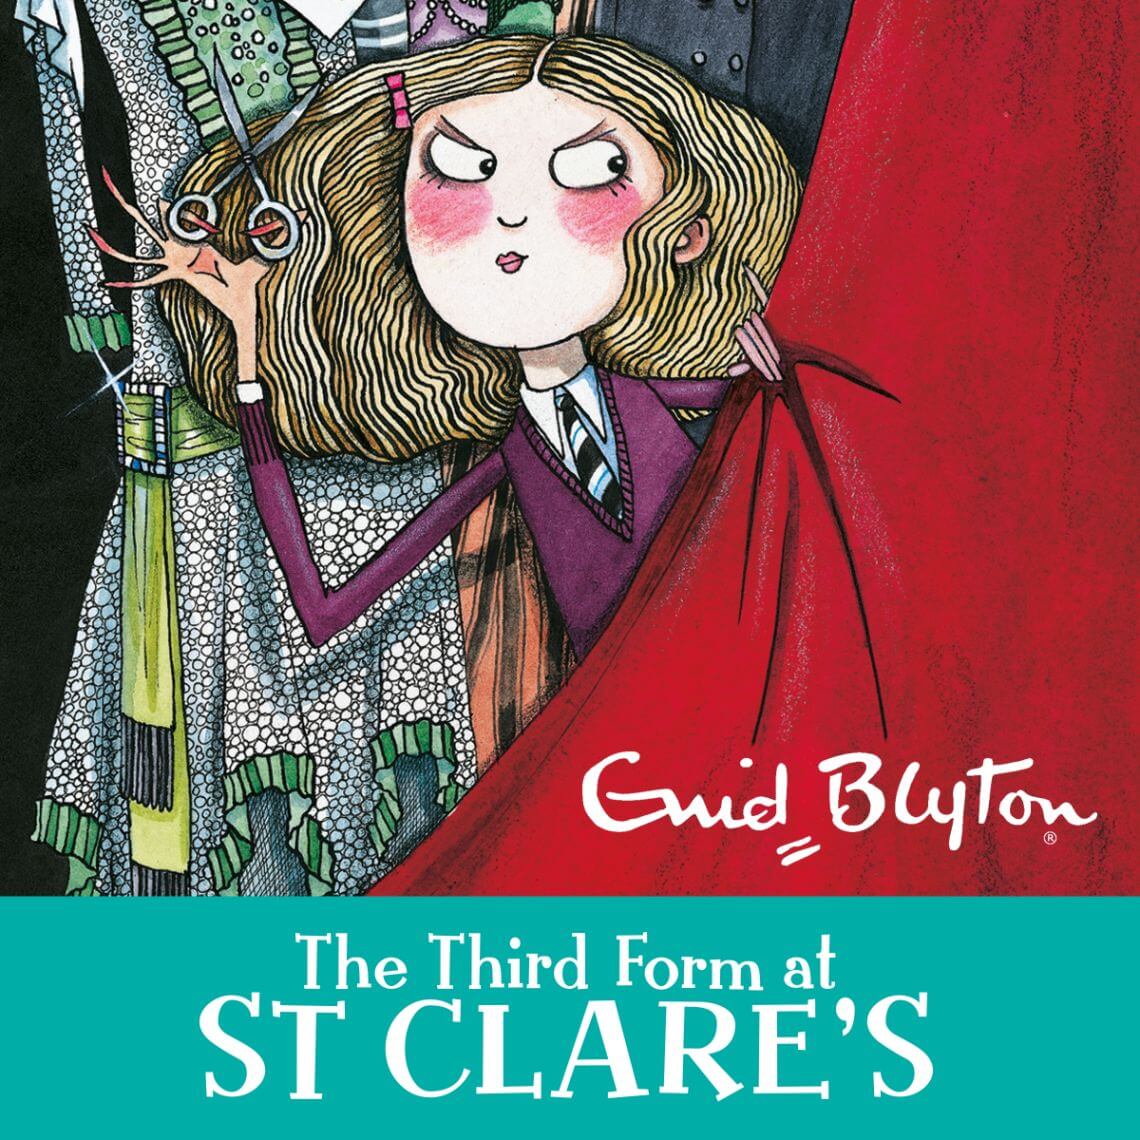 The Third Form at St. Clare's Audiobook Free Download